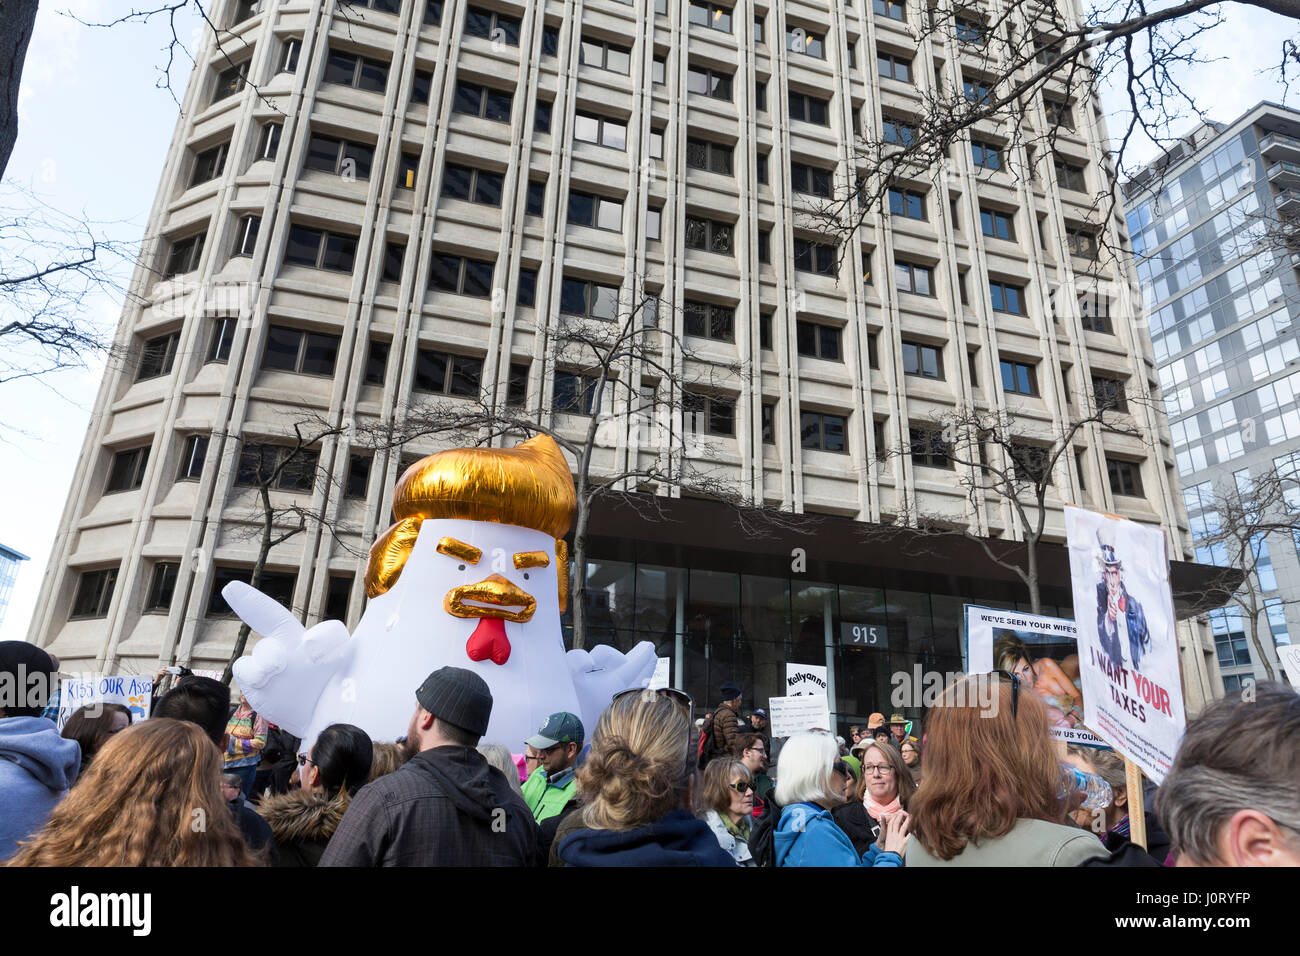 Seattle, Washington, USA. 15th April, 2017. 'Chicken Don' statue appears at the rally at the Henry M. Jackson Federal Building. Hundreds of protestors attended Tax March Seattle, a rally and sister march to the National Tax March taking place in over 180 communities across the U.S. Activists are demanding that President Trump release his tax returns and reveal his business dealings, financial ties, and any potential conflicts of interests. Credit: Paul Gordon/Alamy Live News Stock Photo